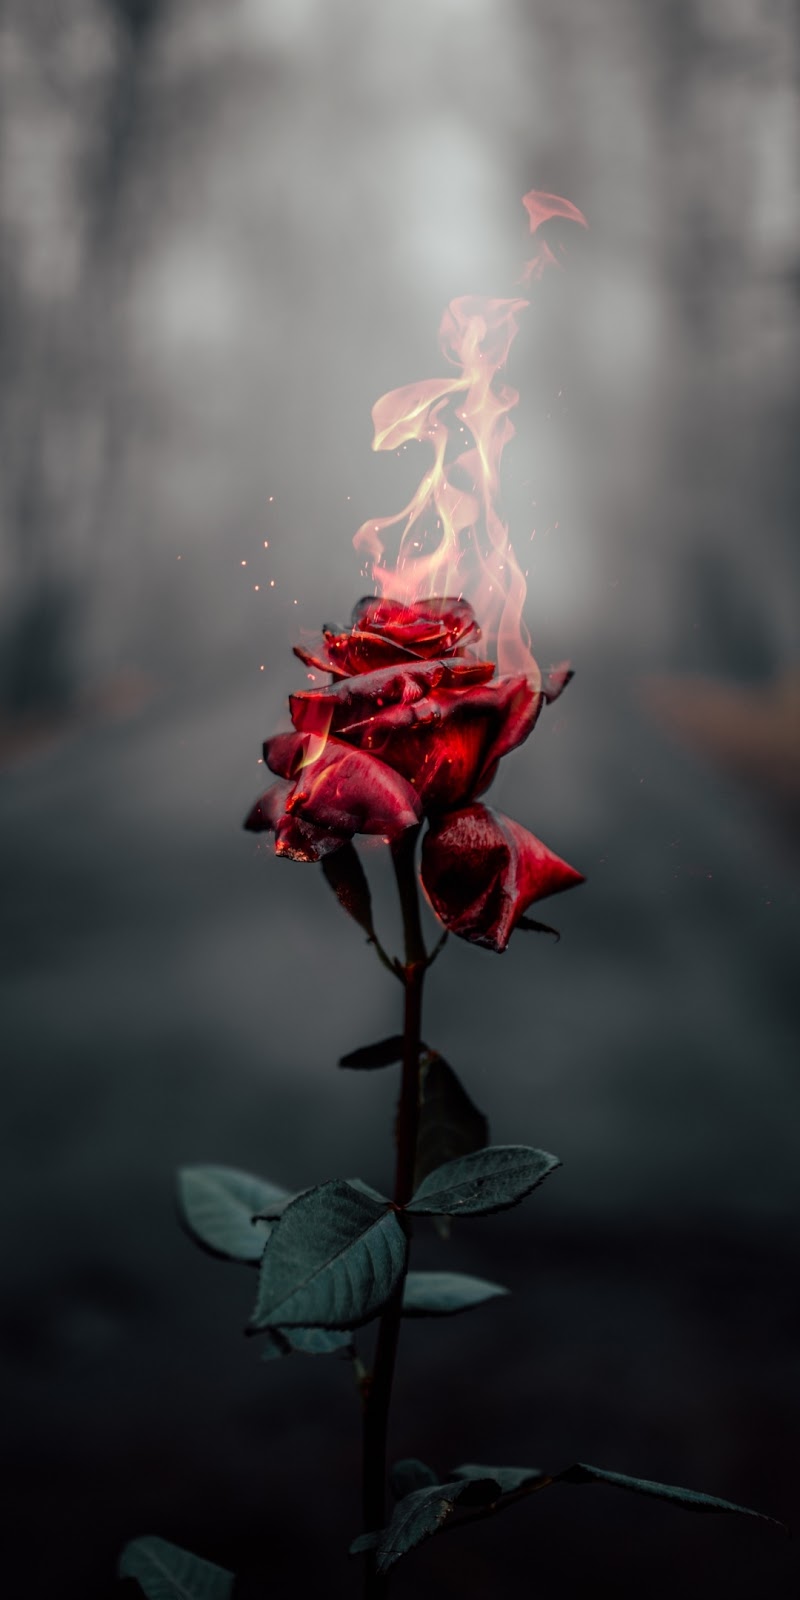 Rose on fire